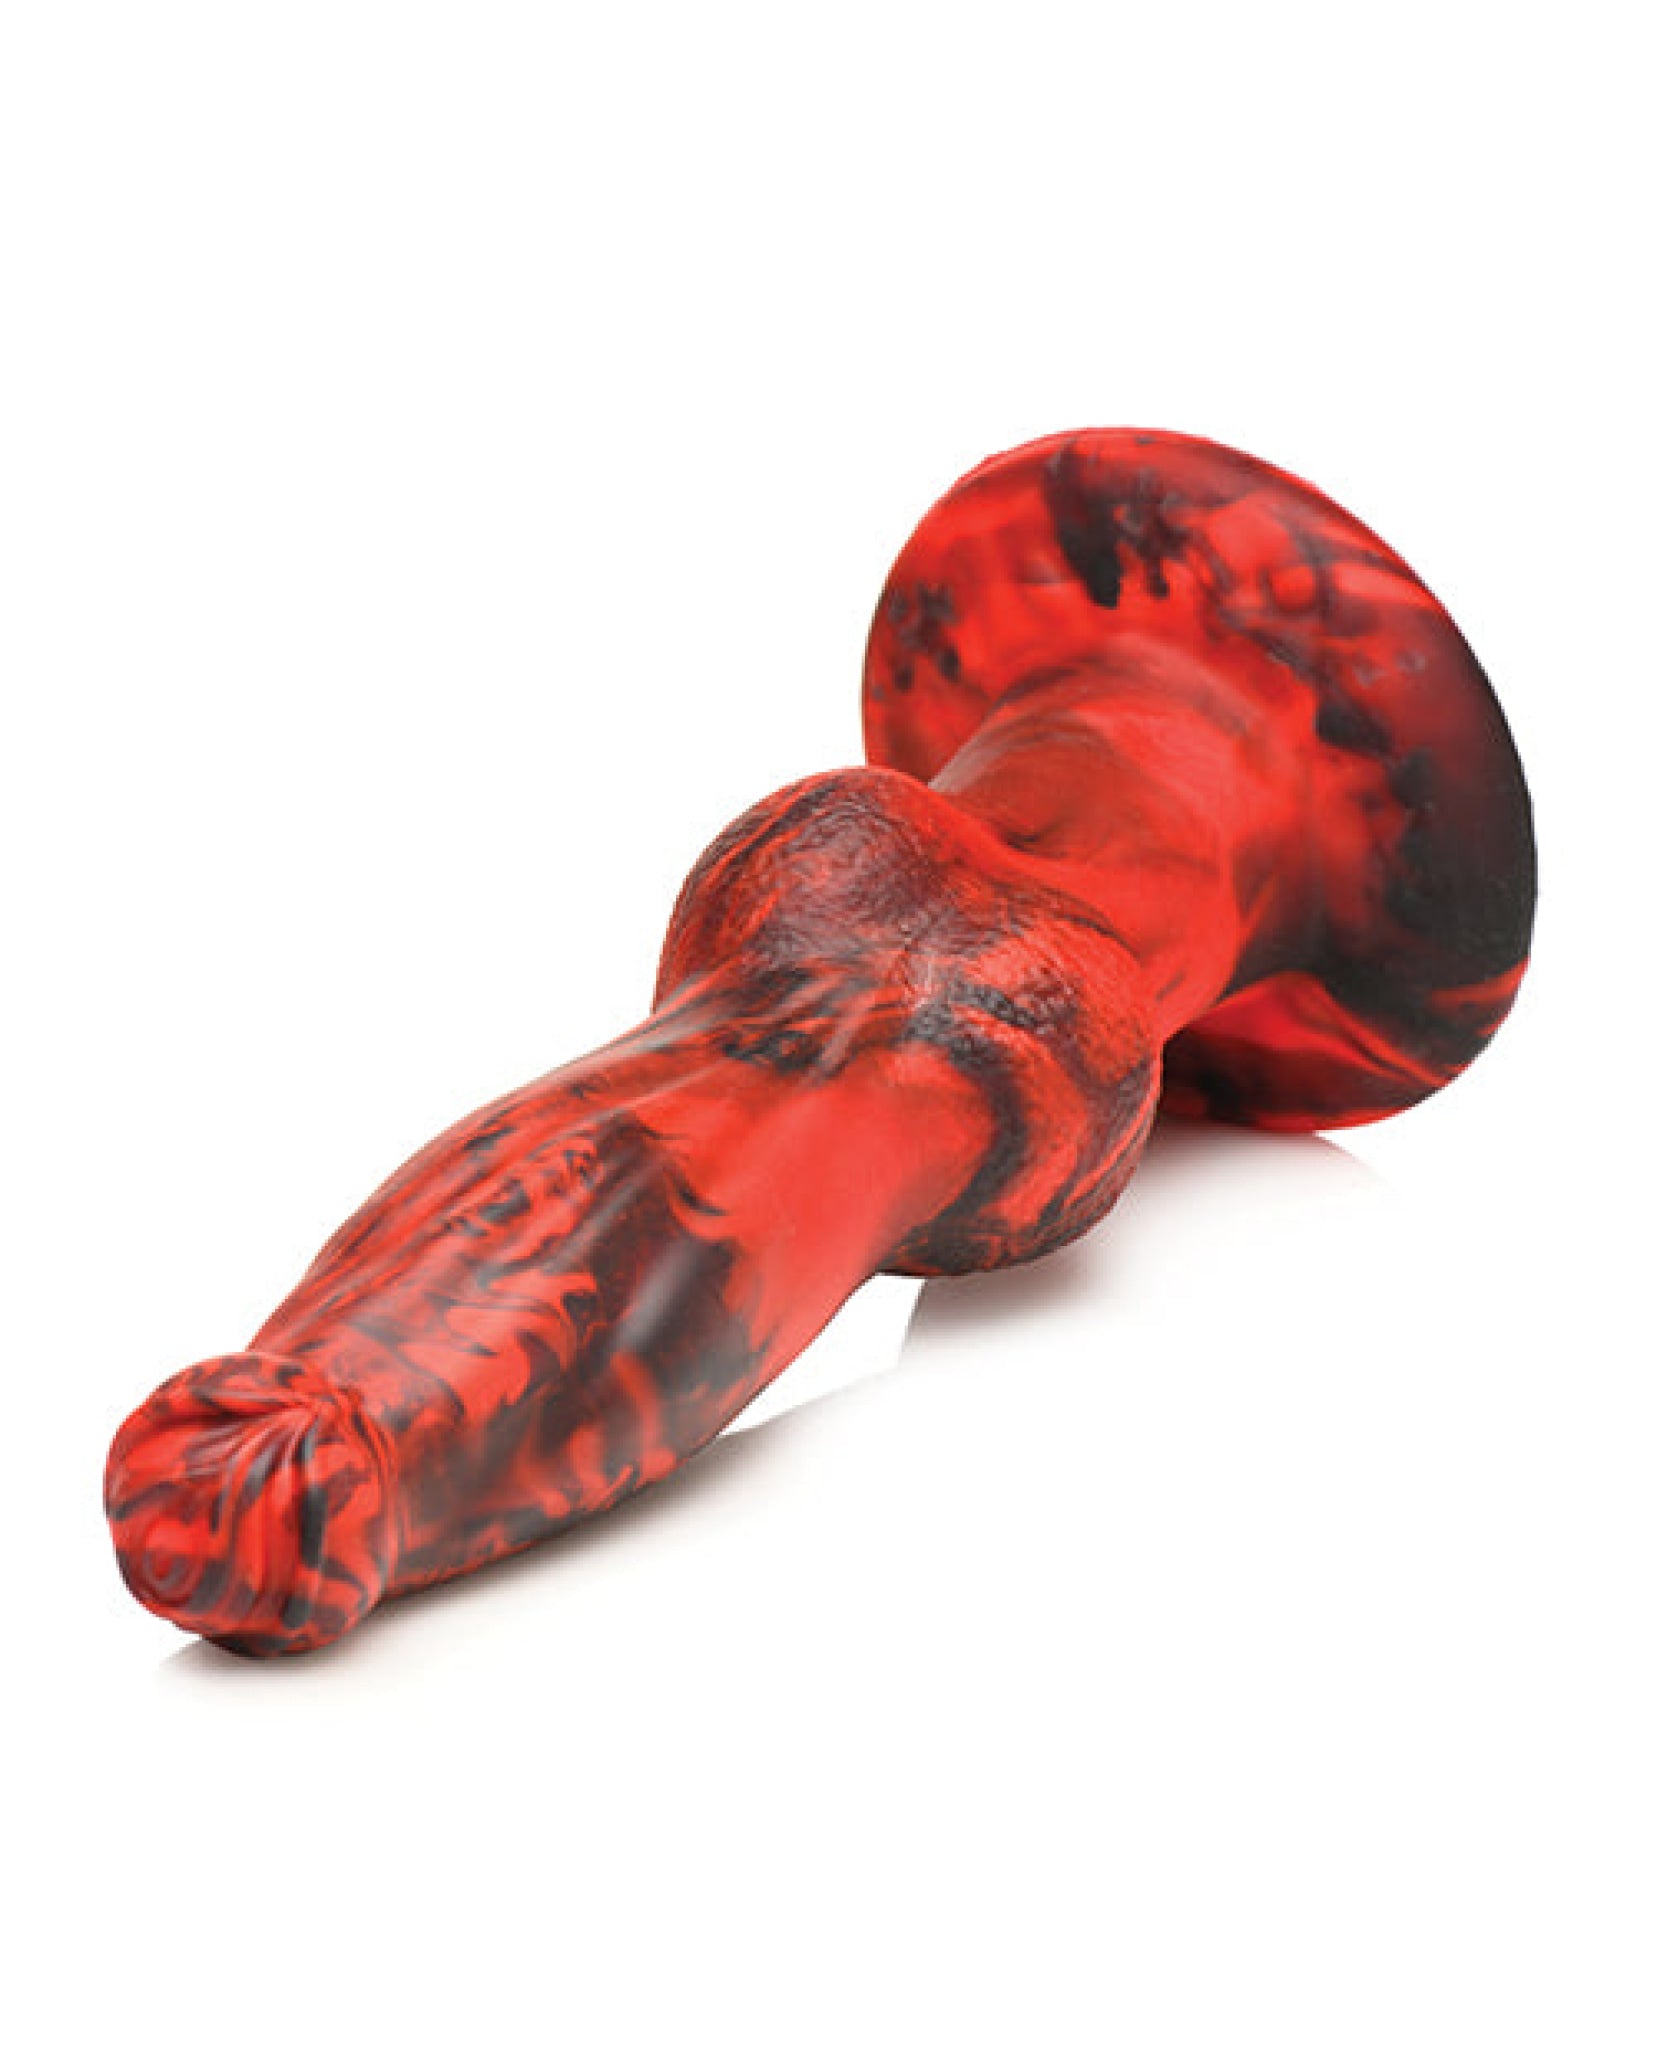 Creature Cocks Hell-Wolf Thrusting & Vibrating Silicone Dildo - Black/Red Xr LLC